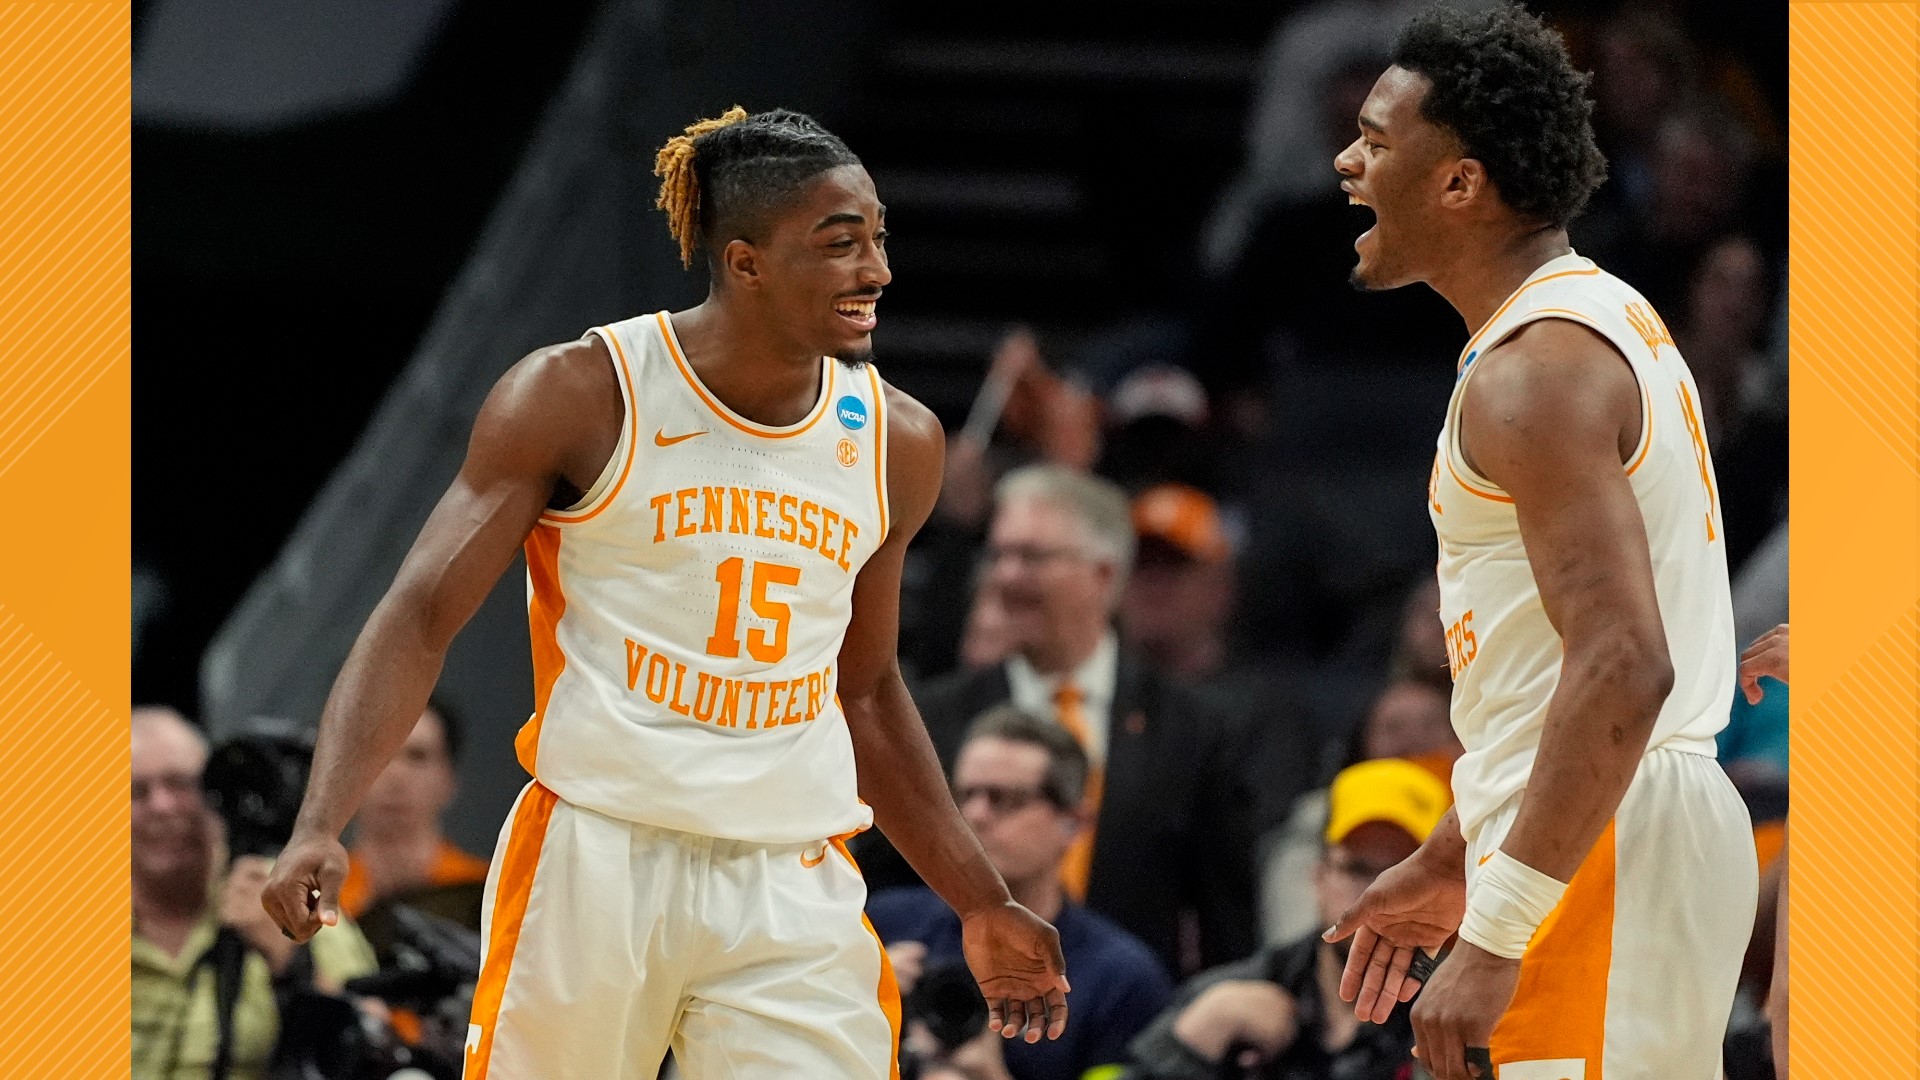 Tennessee Men's Basketball has only made it to the Elite 8 one time in program history in the 2009-2010 season. The Vols want to make it there and further.